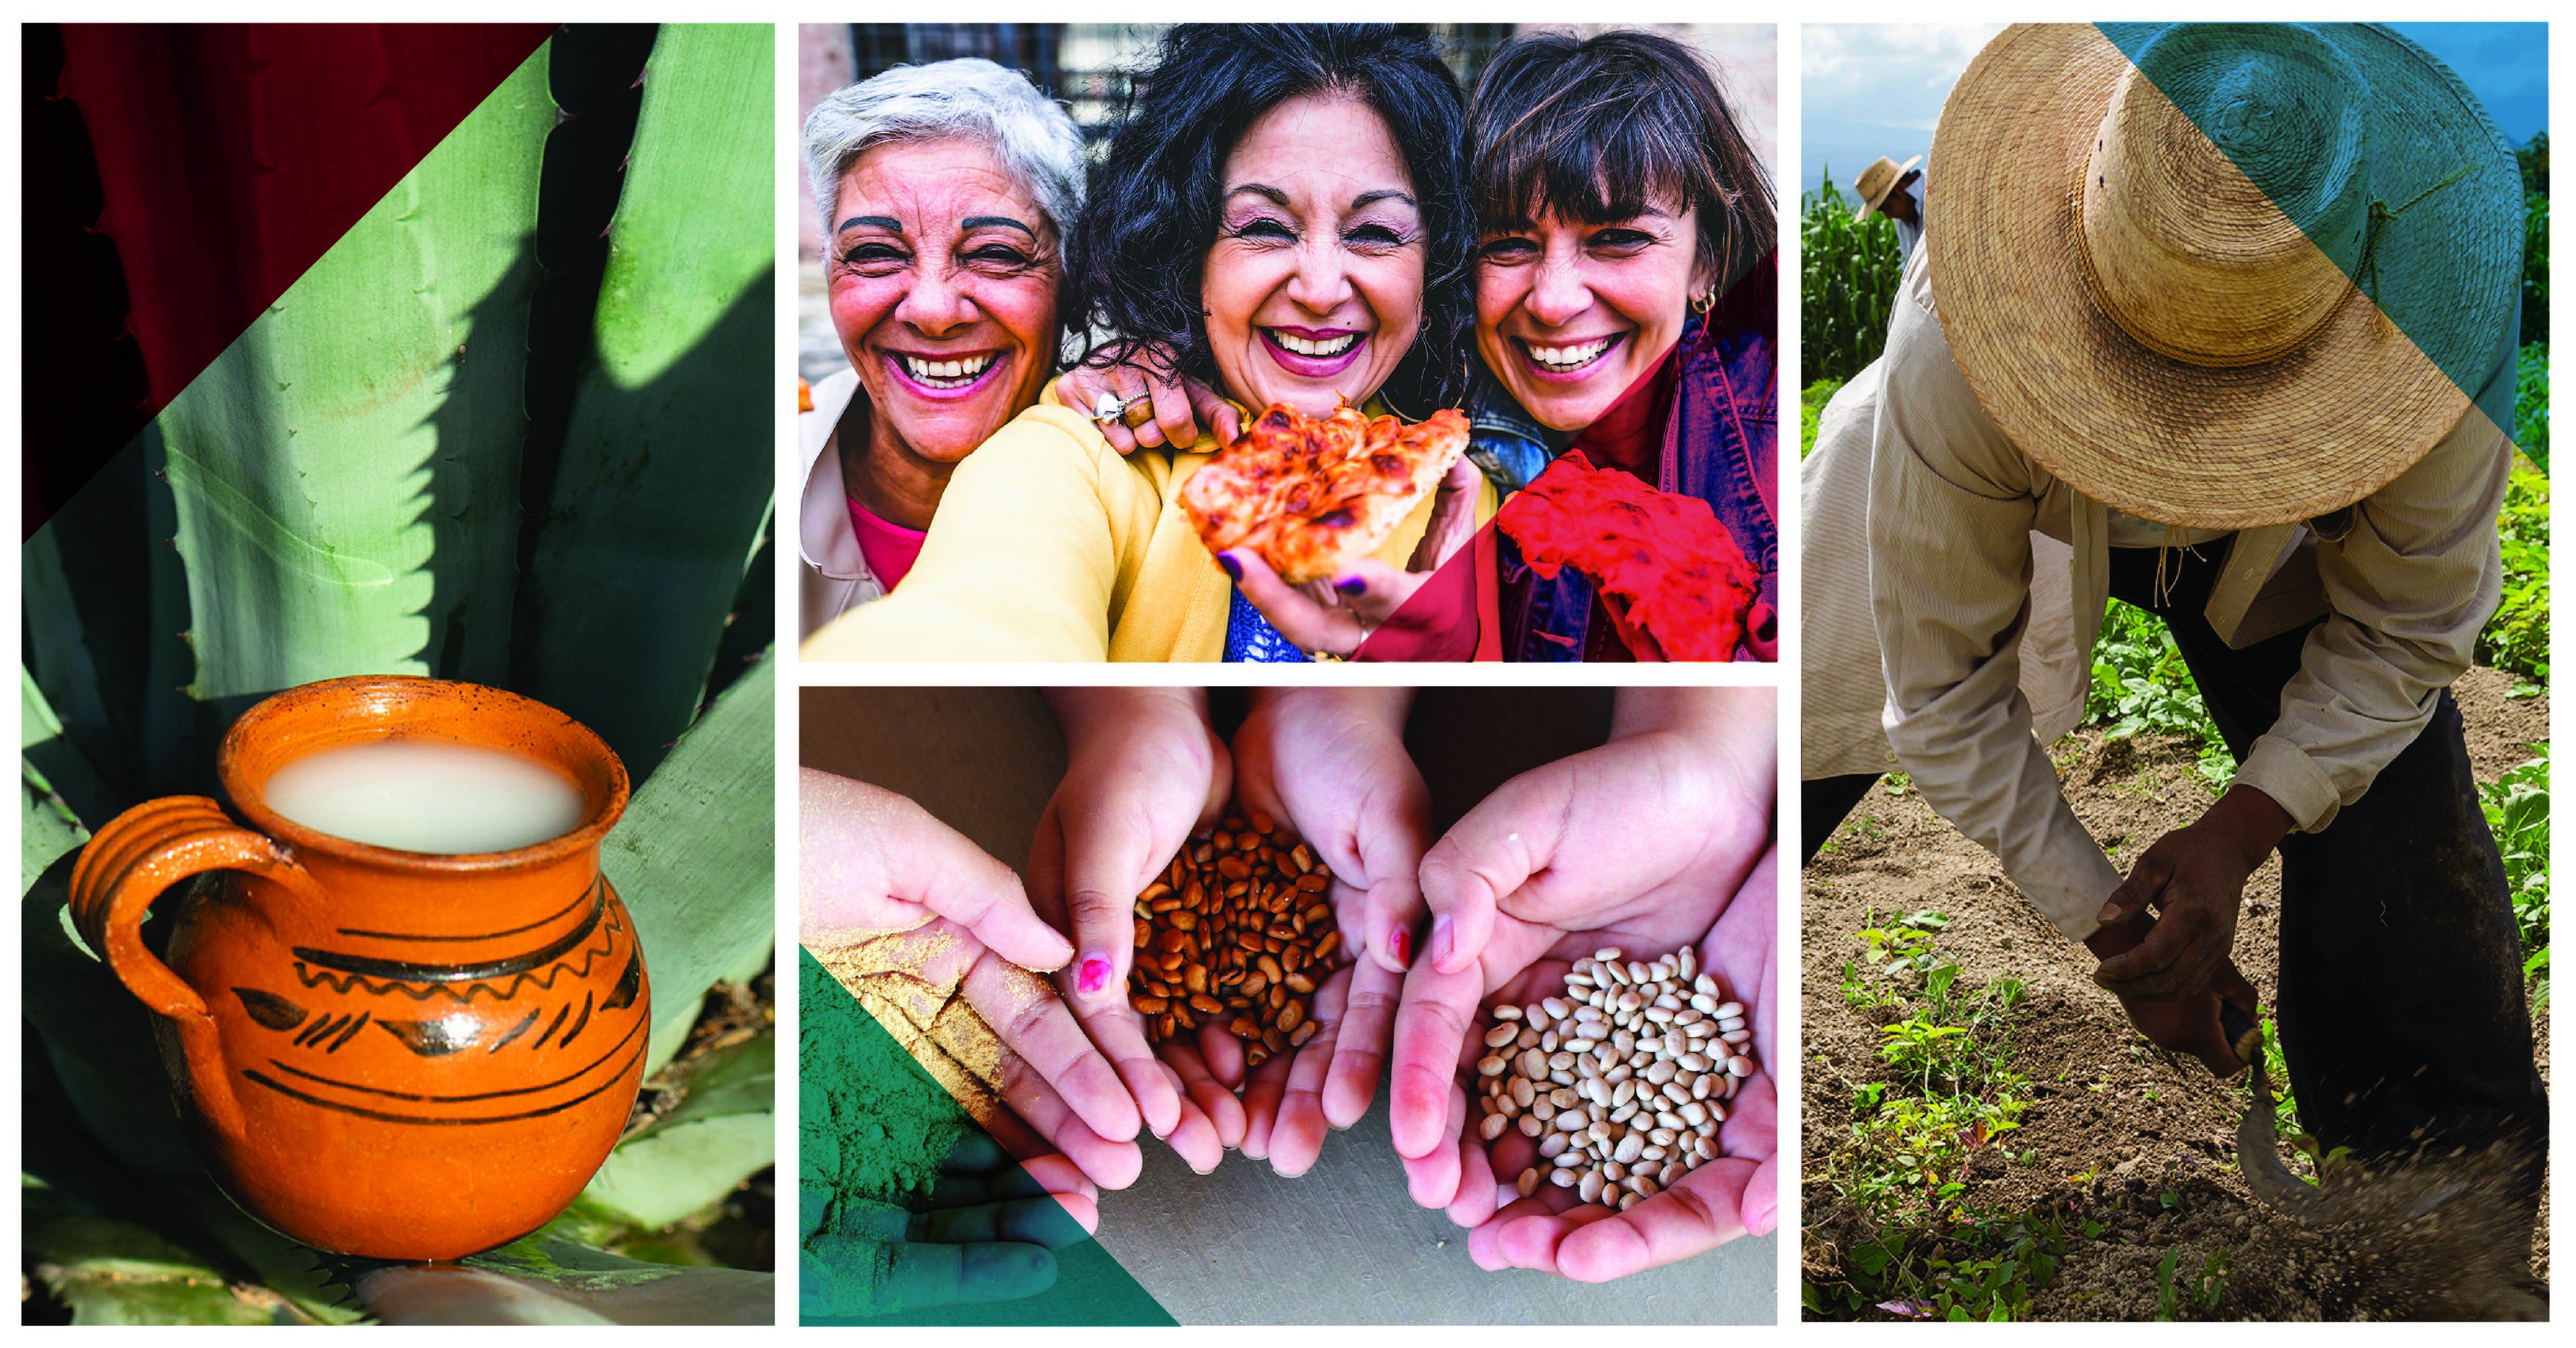 A collage of people farming, people eating pizza and smiling, a clay pot filled with agave, and cupped hands holding food ingredients.